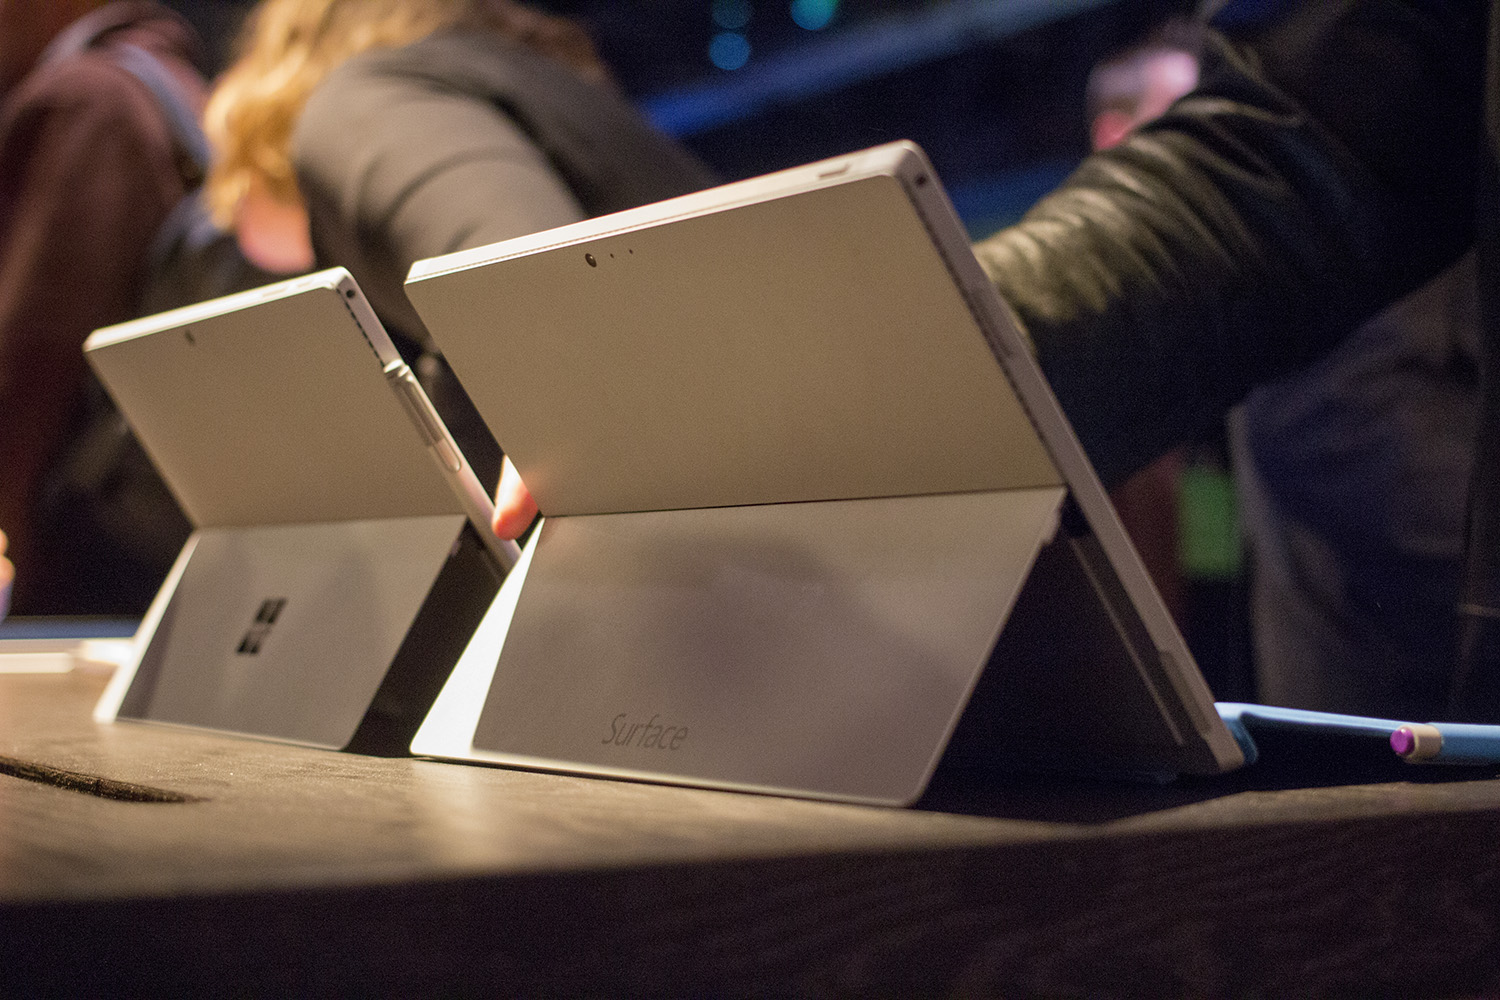 Microsoft Surface Pro 4 and 3